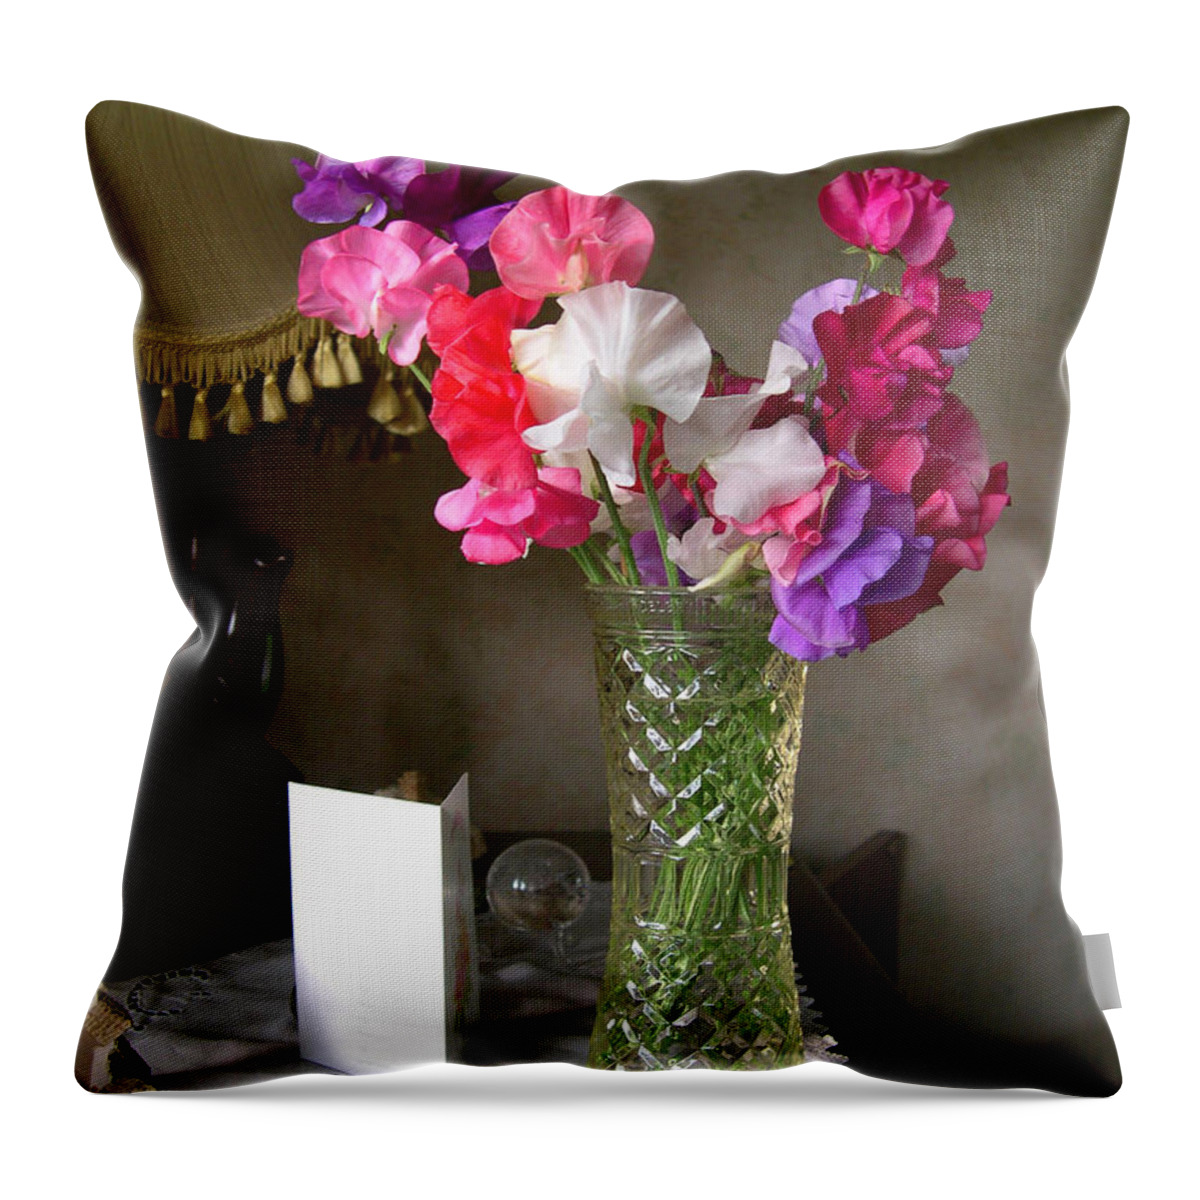 Sweet Throw Pillow featuring the photograph A Bright Corner by Brenda Kean